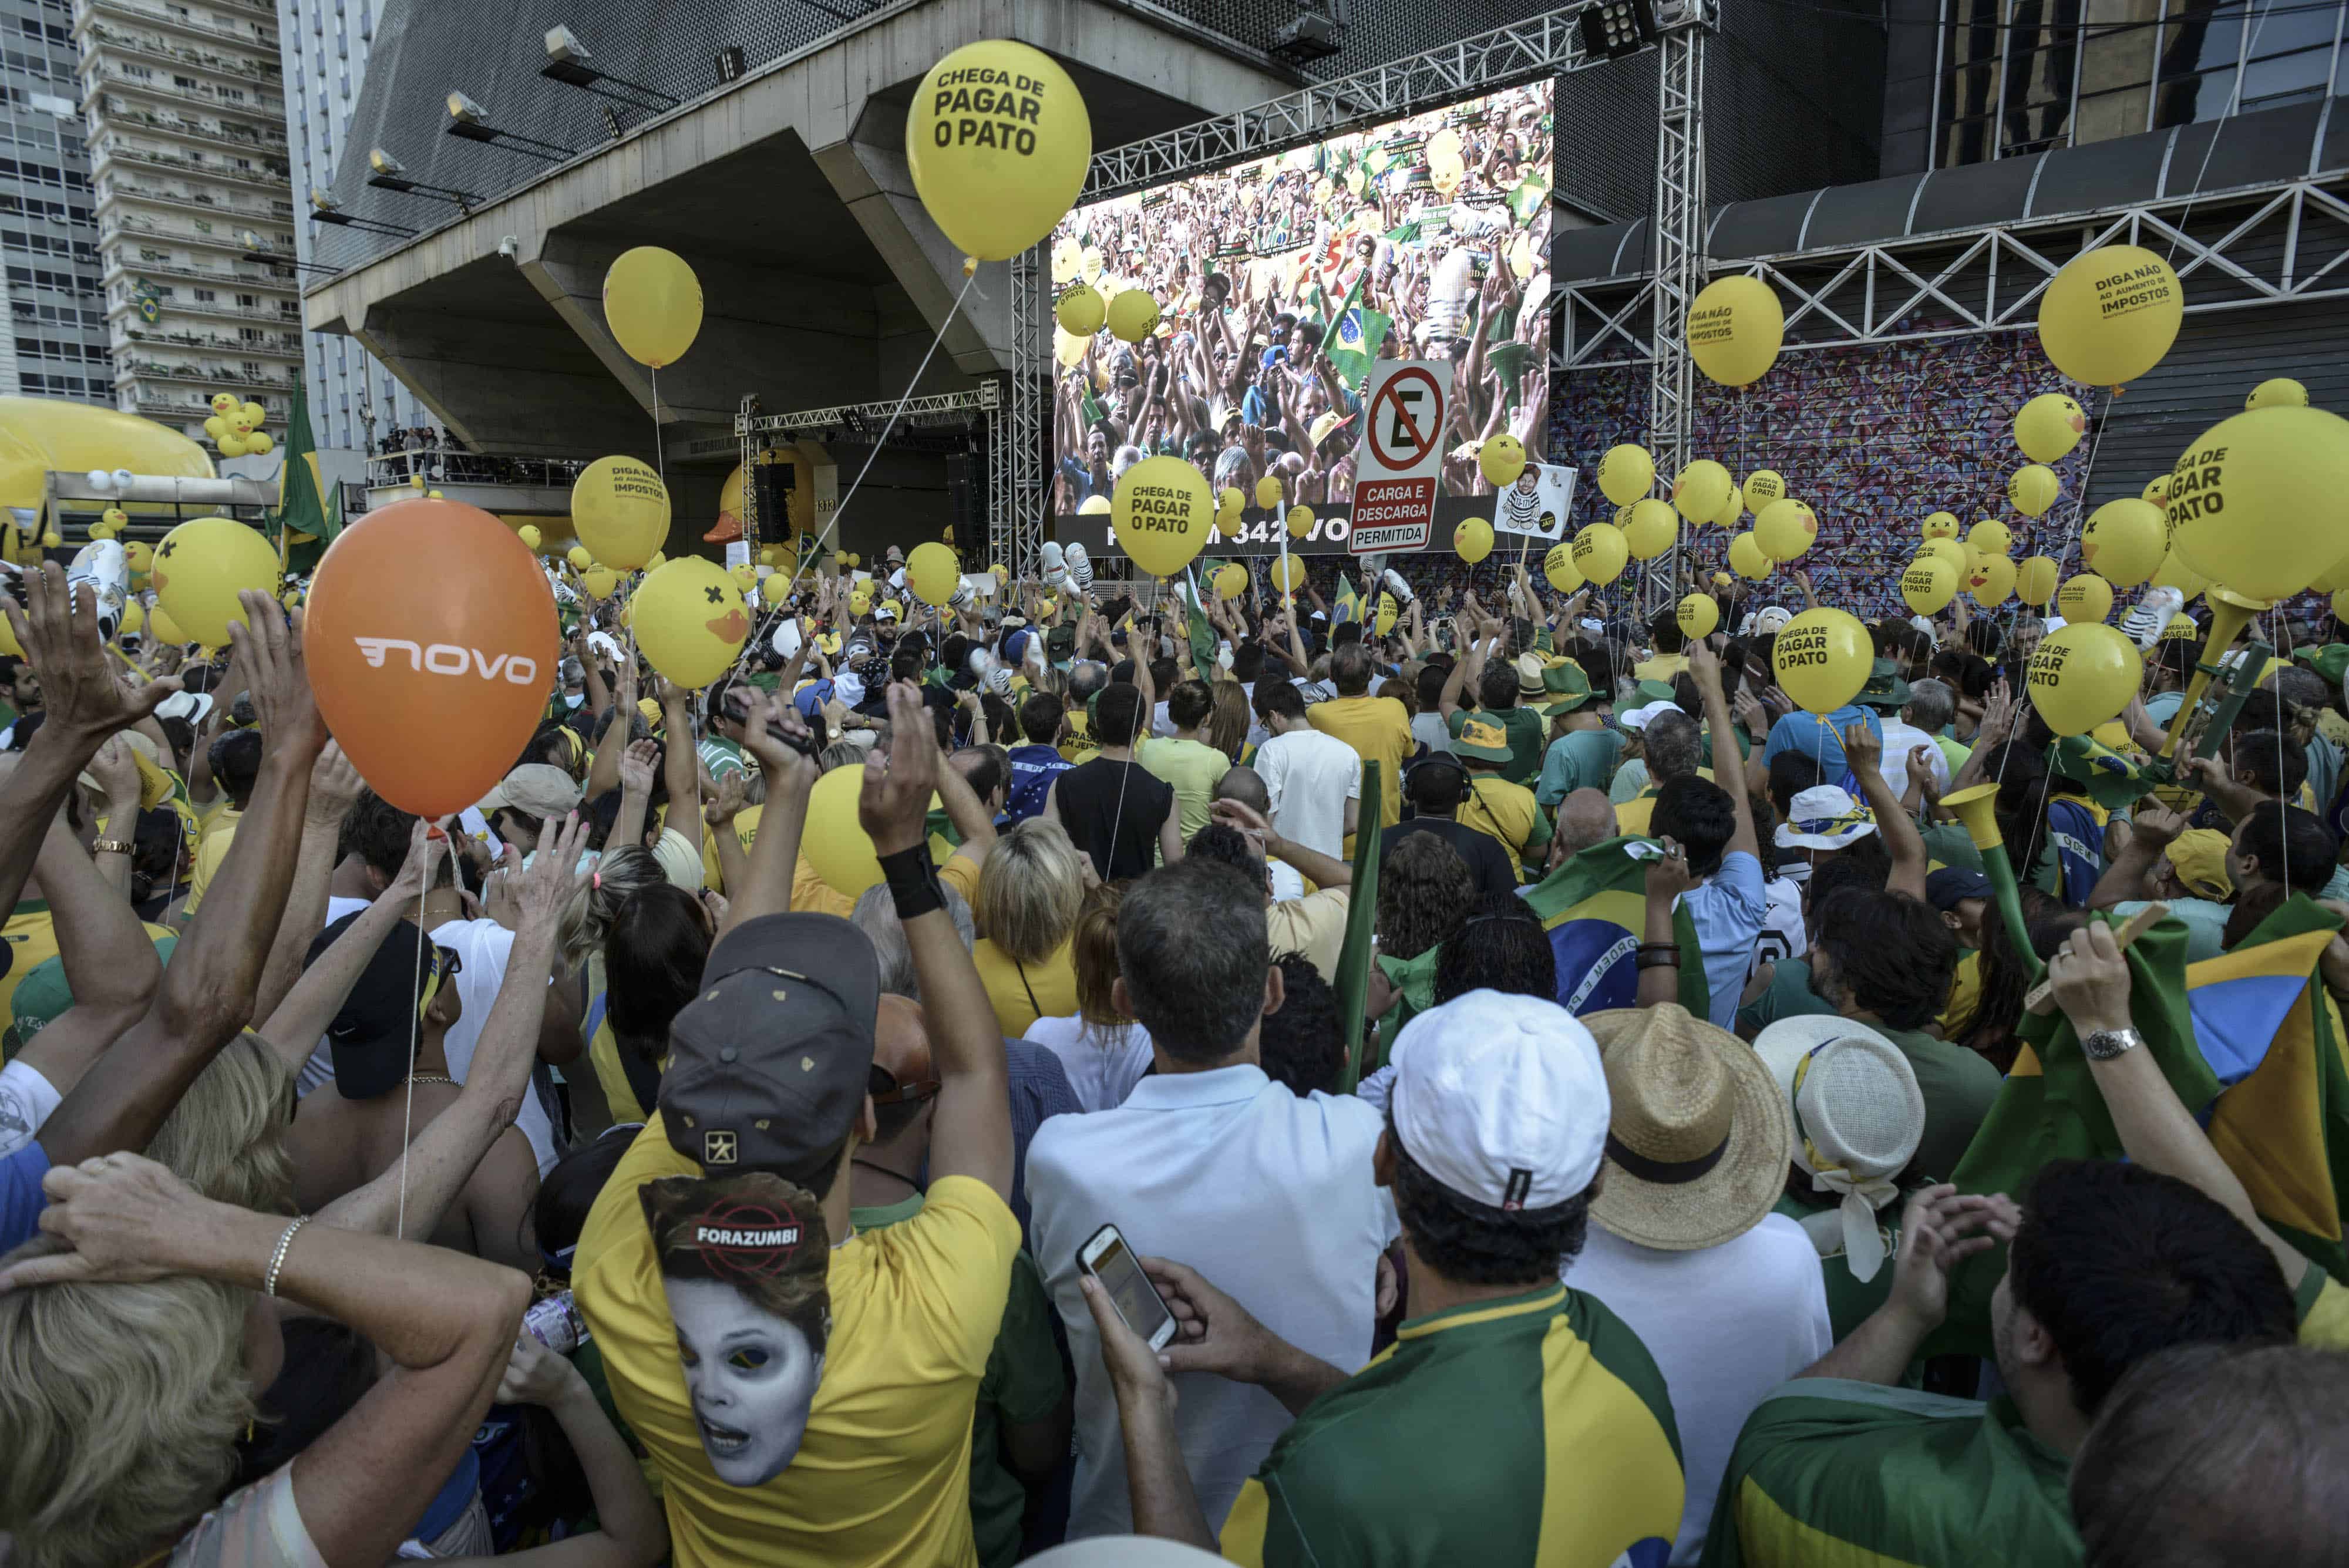 protest against Dilma Rousseff Brazil